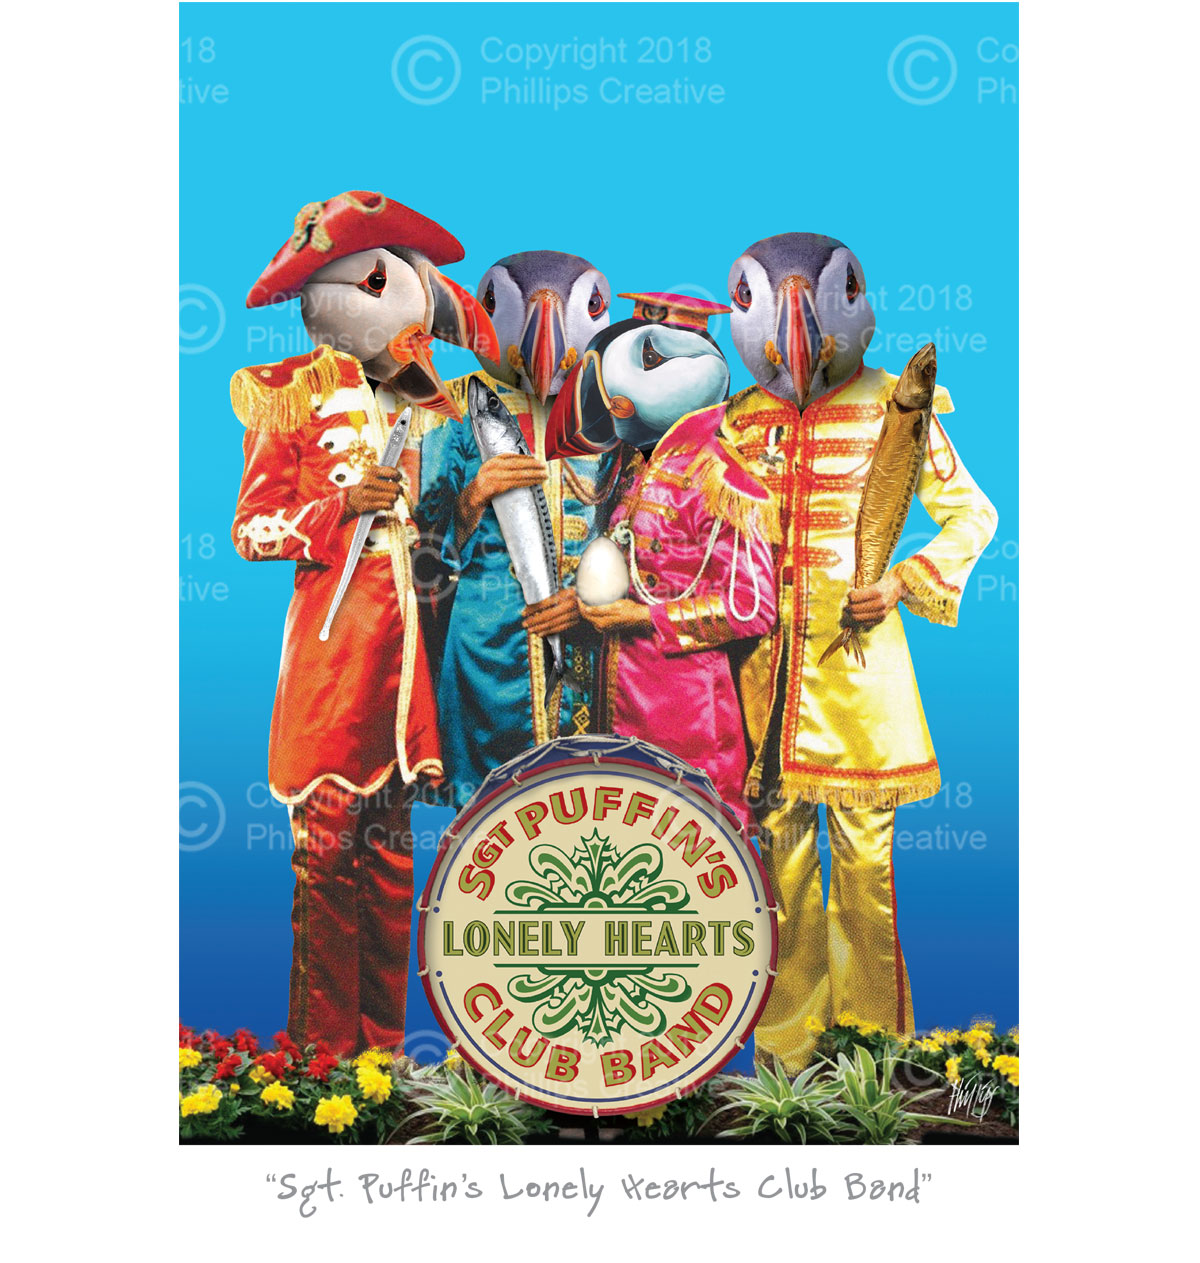 Sgt Puffin's Lonely Hearts Club Band